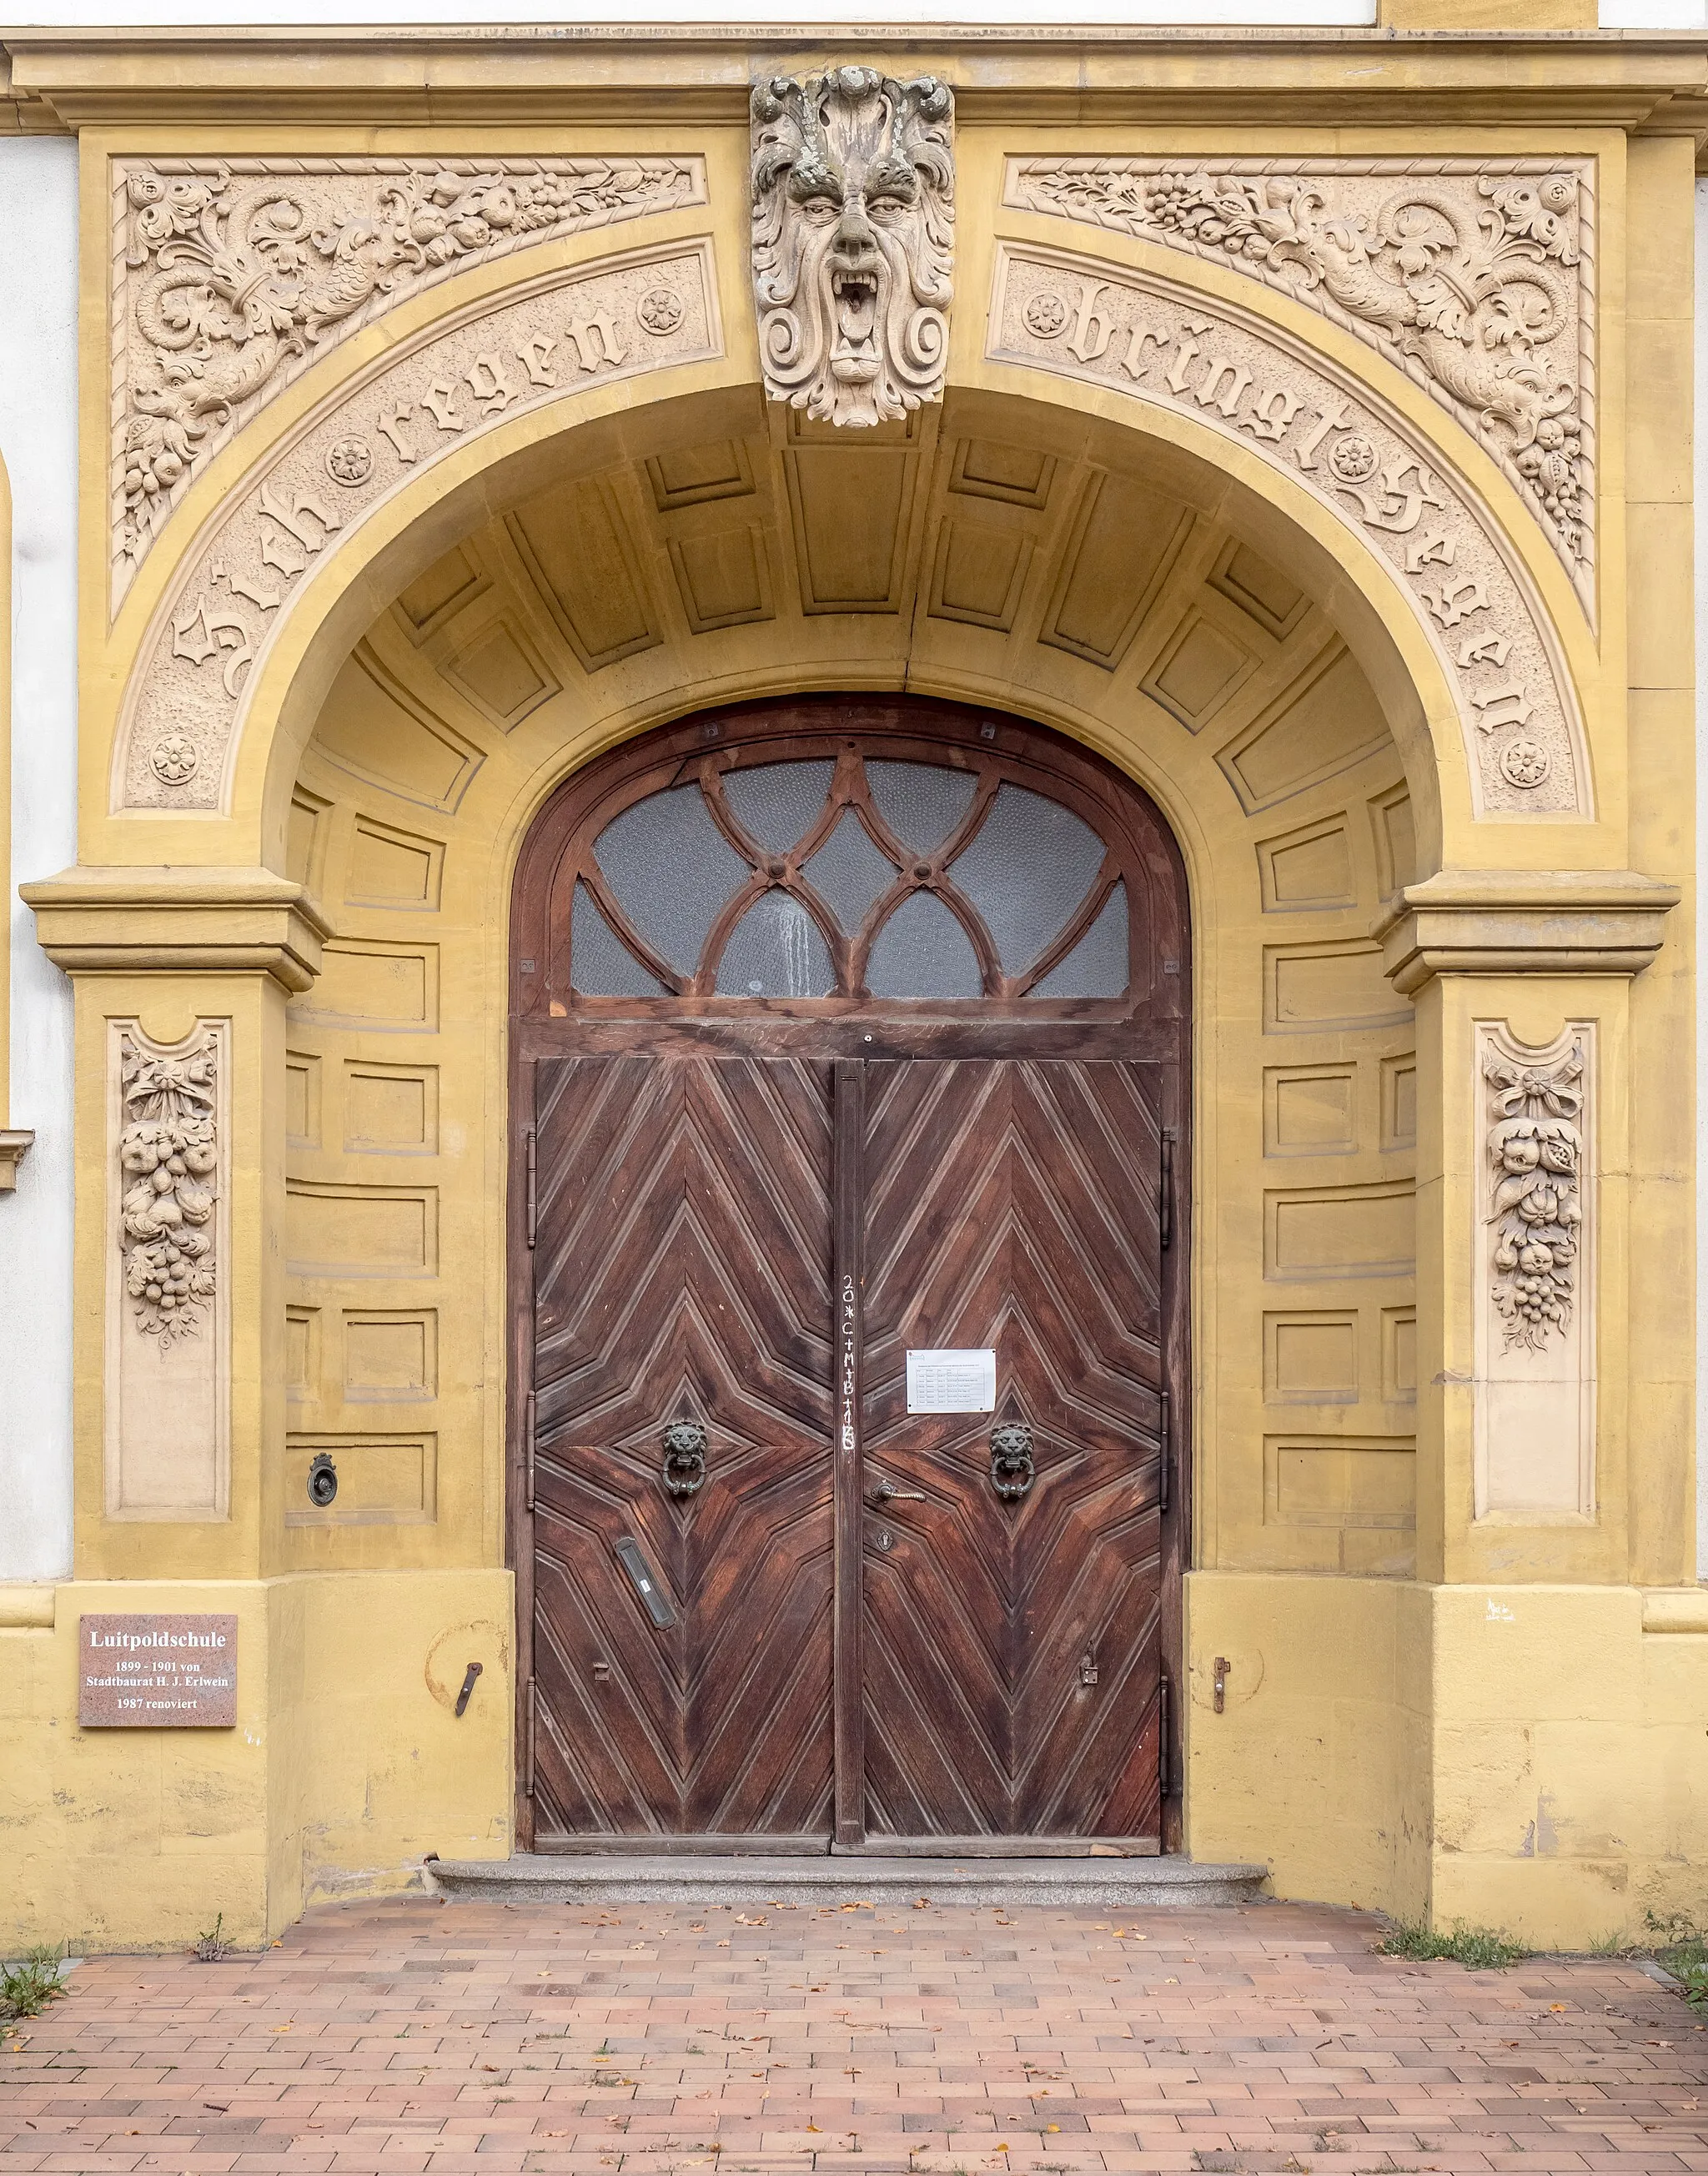 Photo showing: Right entrance door of the Luitpoldschule in Bamberg